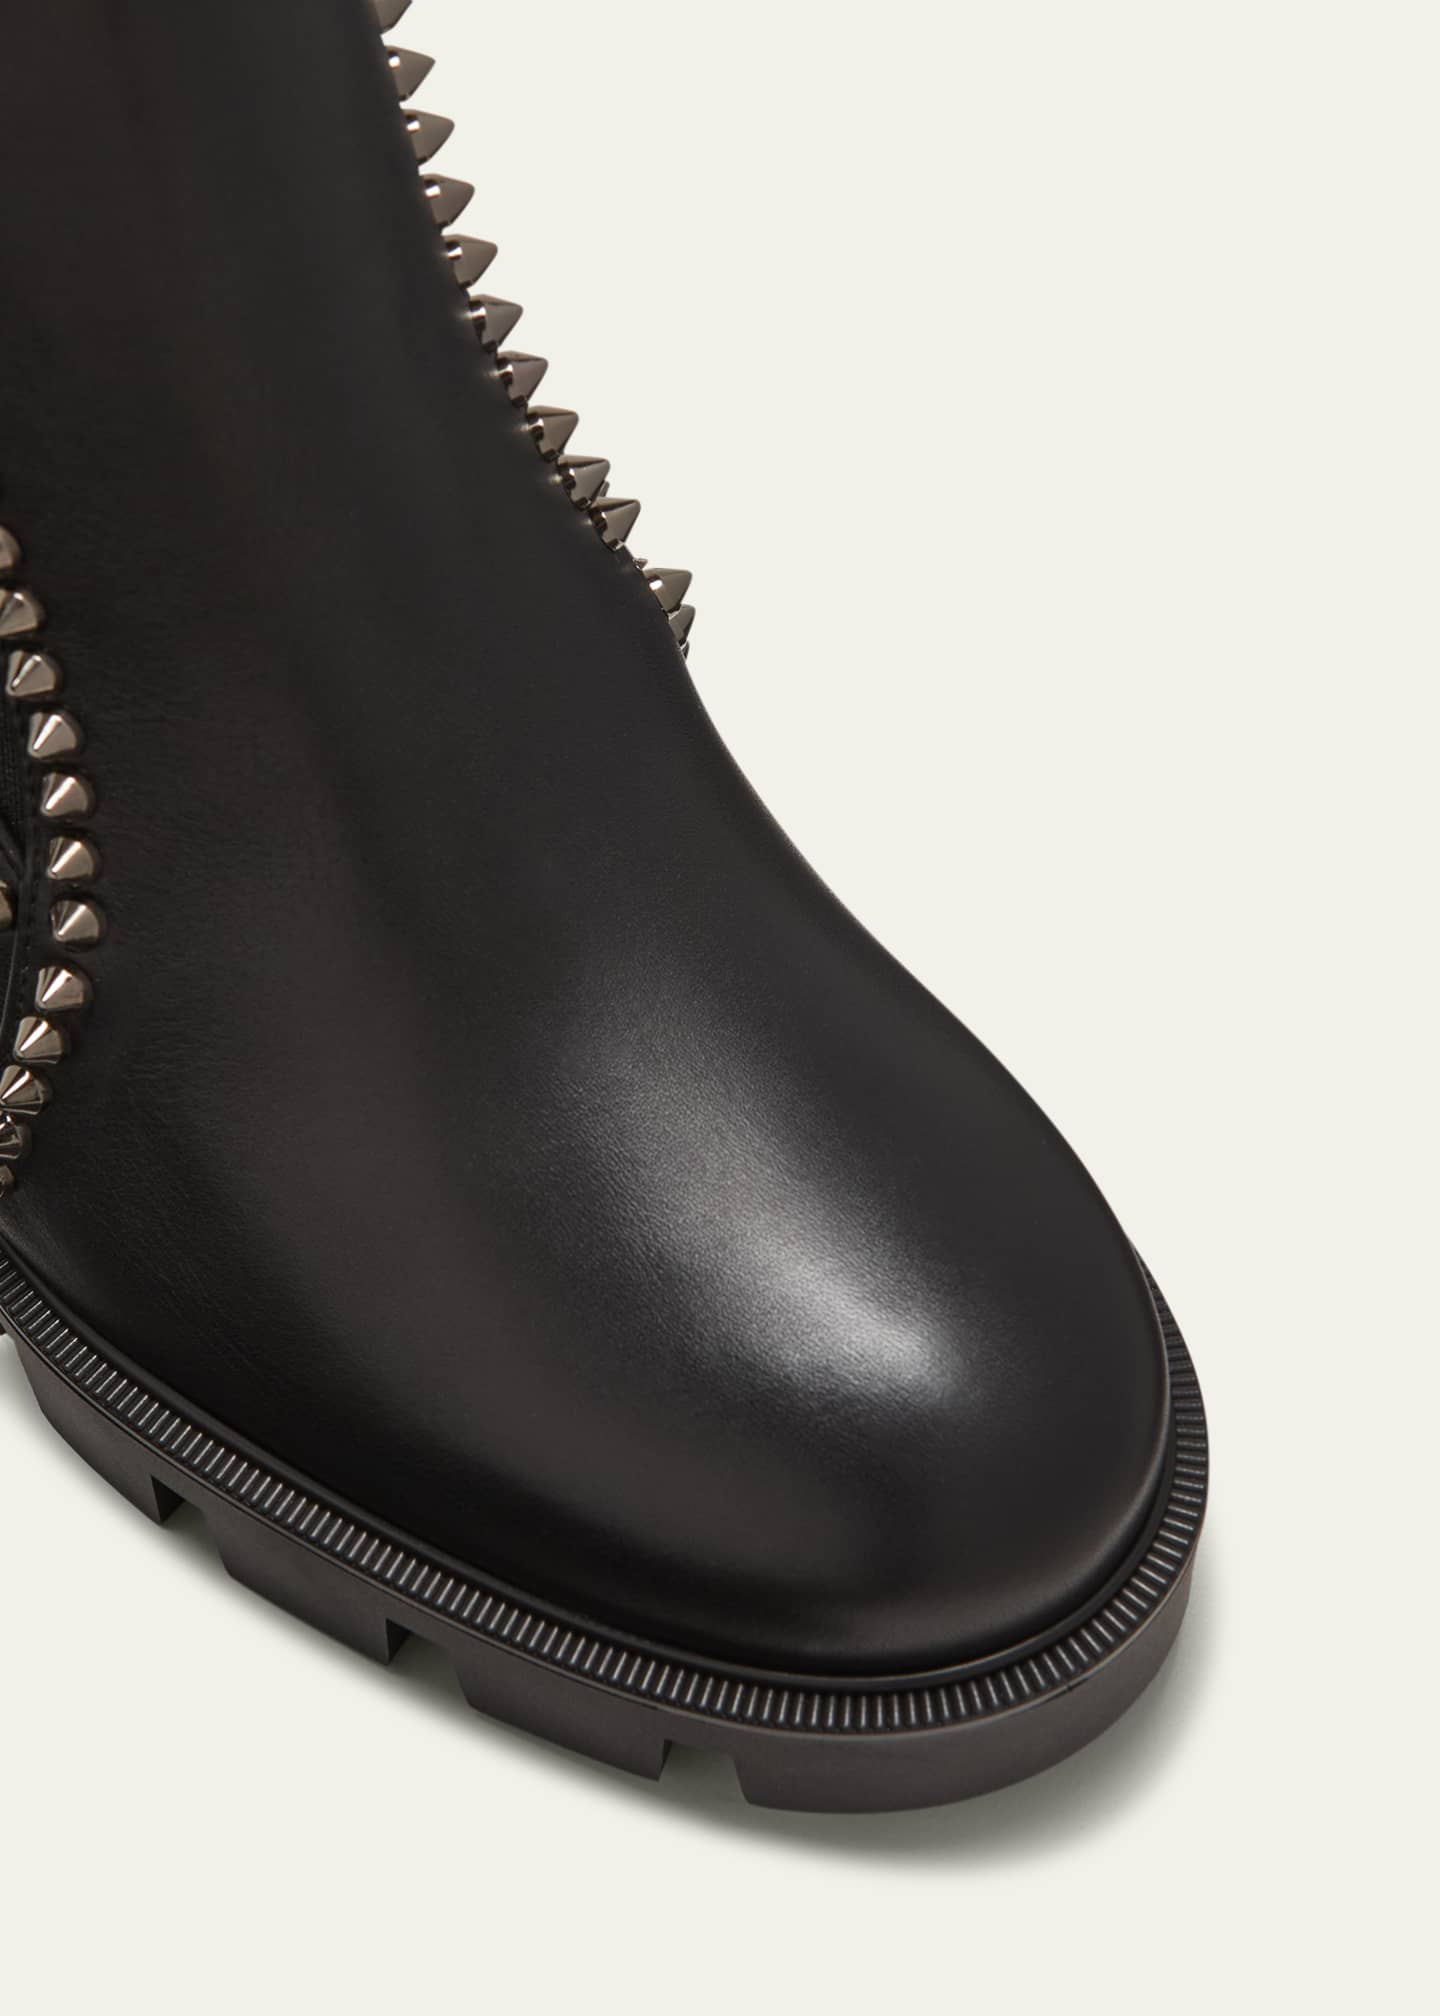 Mens Christian Louboutin Chelsea Boots, Spike Boots